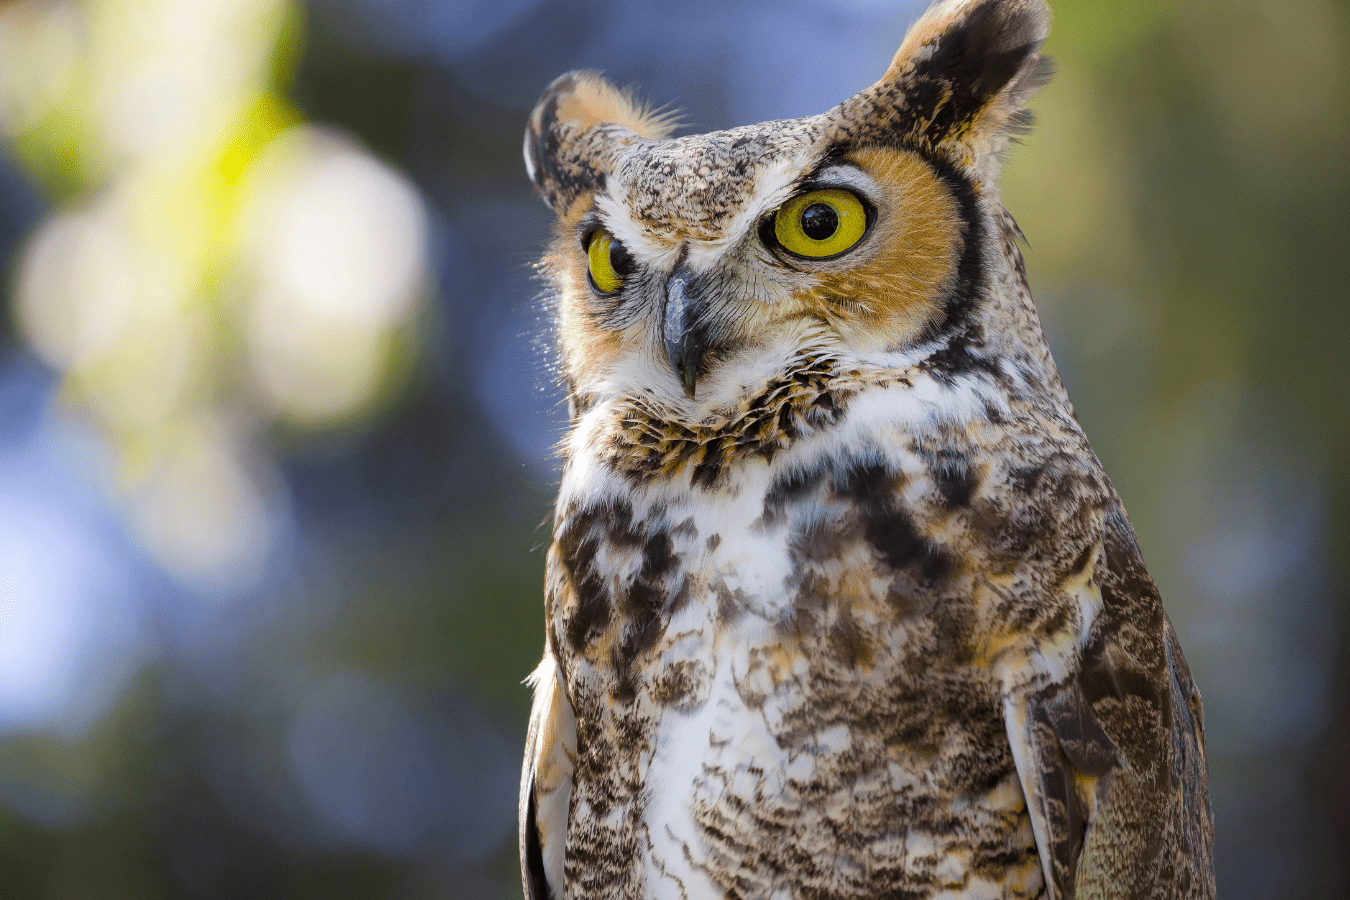 What Do Owls Mean in Dreams?